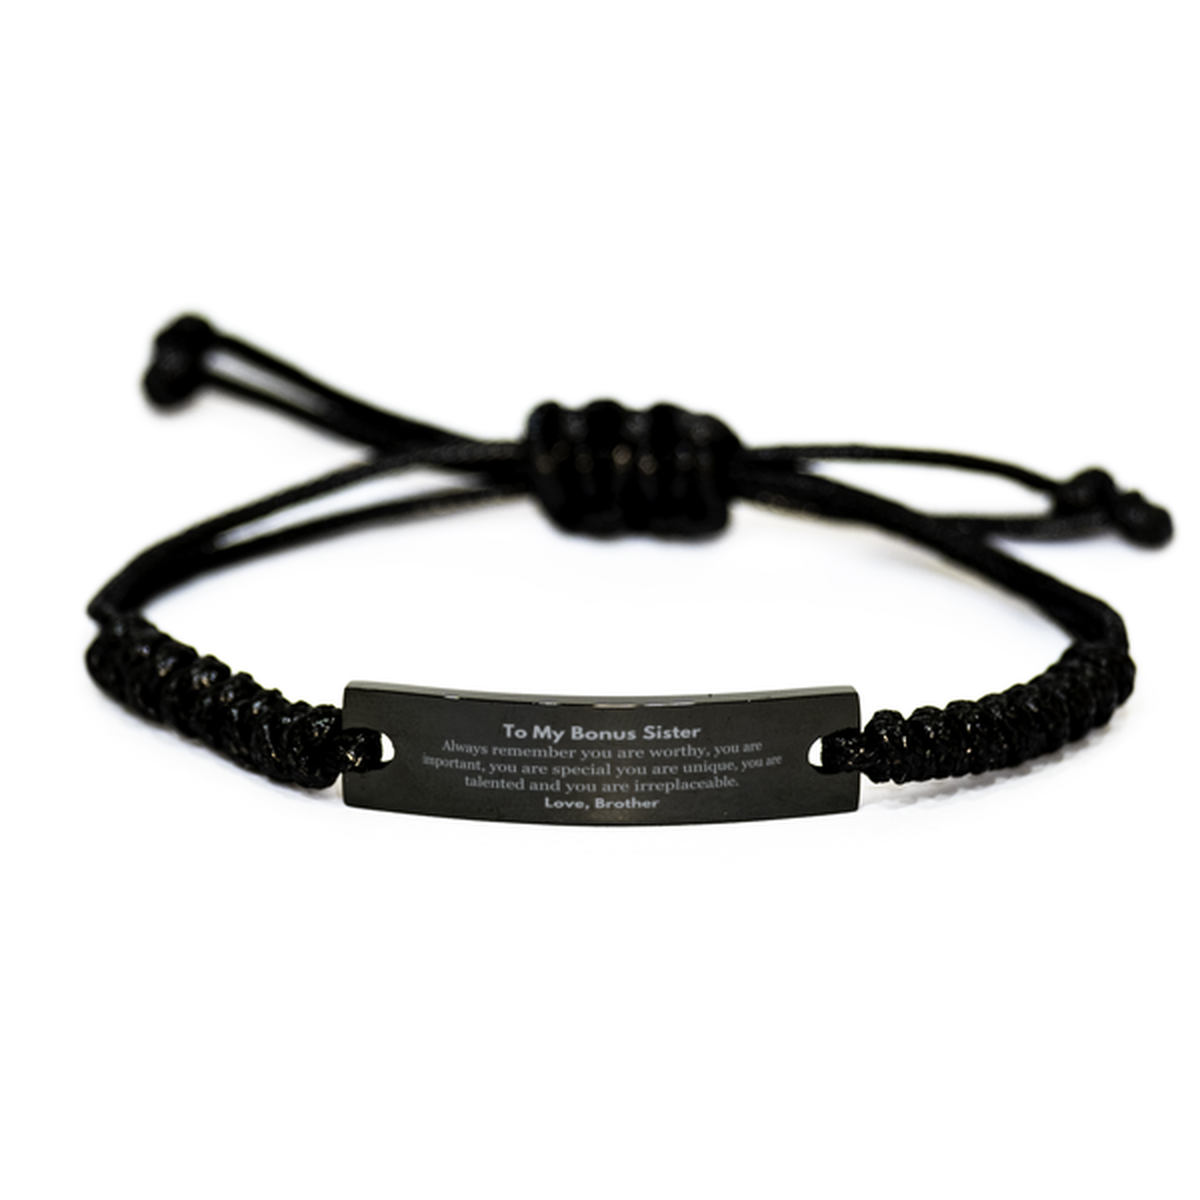 Bonus Sister Birthday Gifts from Brother, Inspirational Black Rope Bracelet for Bonus Sister Christmas Graduation Gifts for Bonus Sister Always remember you are worthy, you are important. Love, Brother